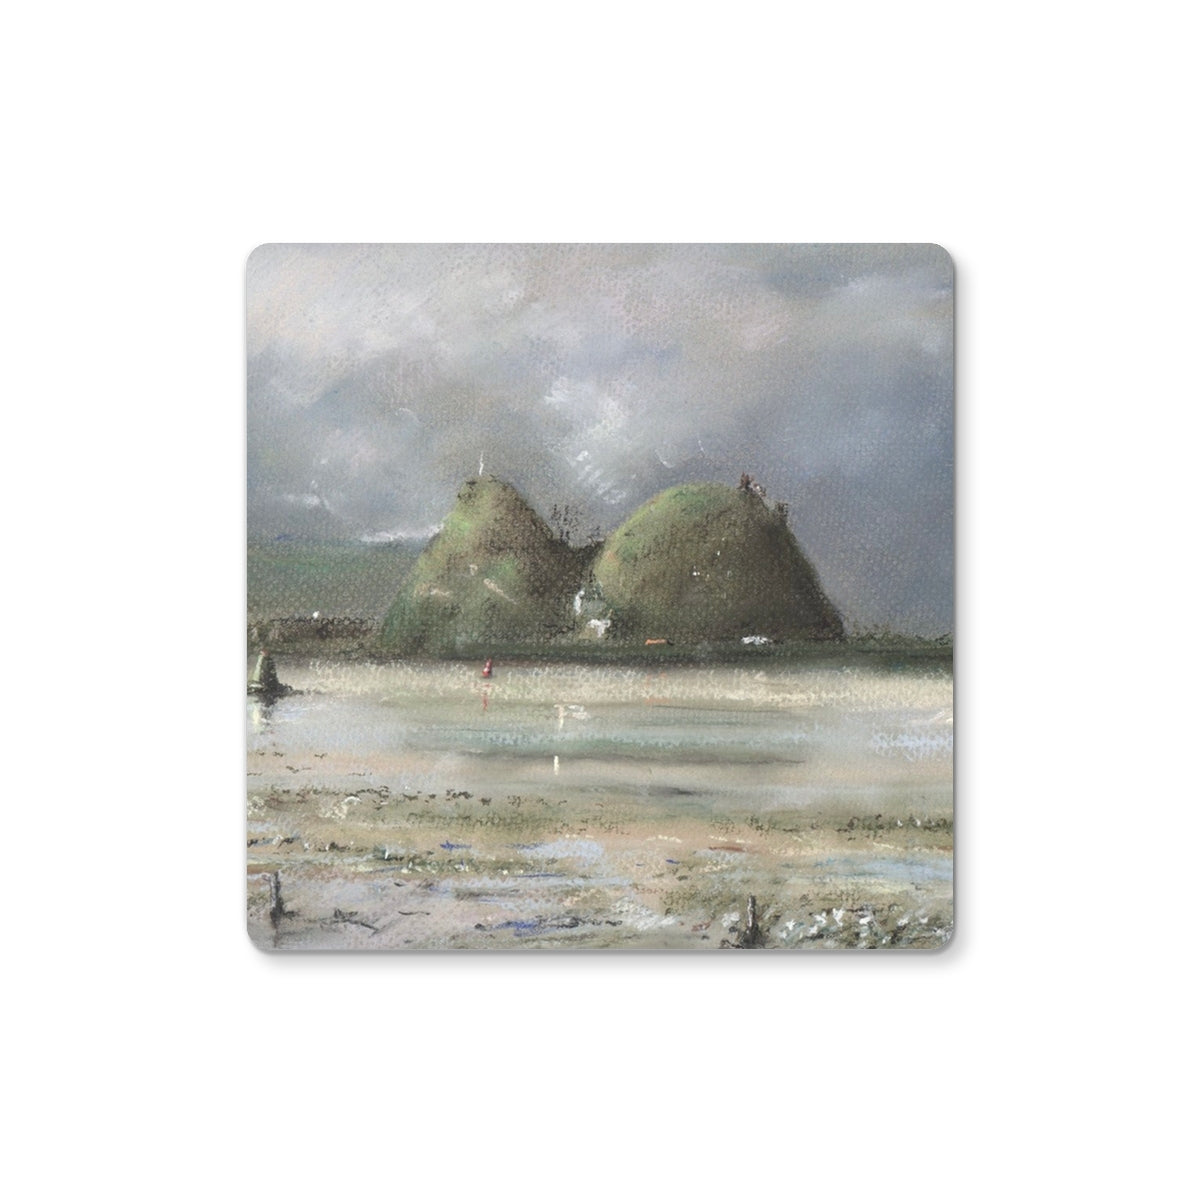 Dumbarton Rock Art Gifts Coaster-Homeware-River Clyde Art Gallery-2 Coasters-Paintings, Prints, Homeware, Art Gifts From Scotland By Scottish Artist Kevin Hunter